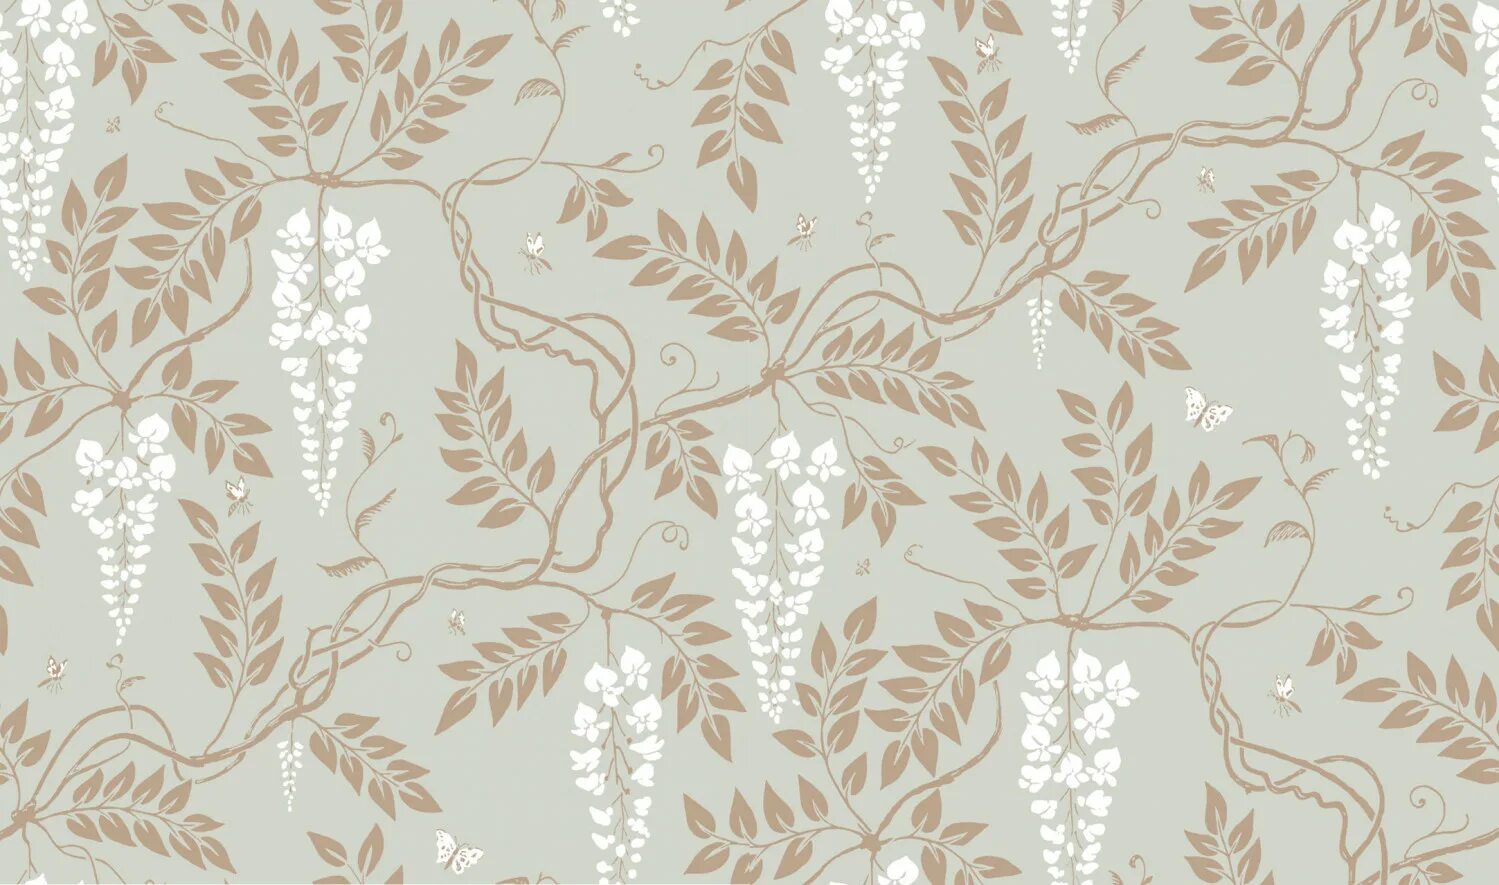 Son collection. Cole & son, коллекция collection of Flowers,. Английские обои Cole son. Обои Sanderson 216608. Обои Sanderson w 215702.